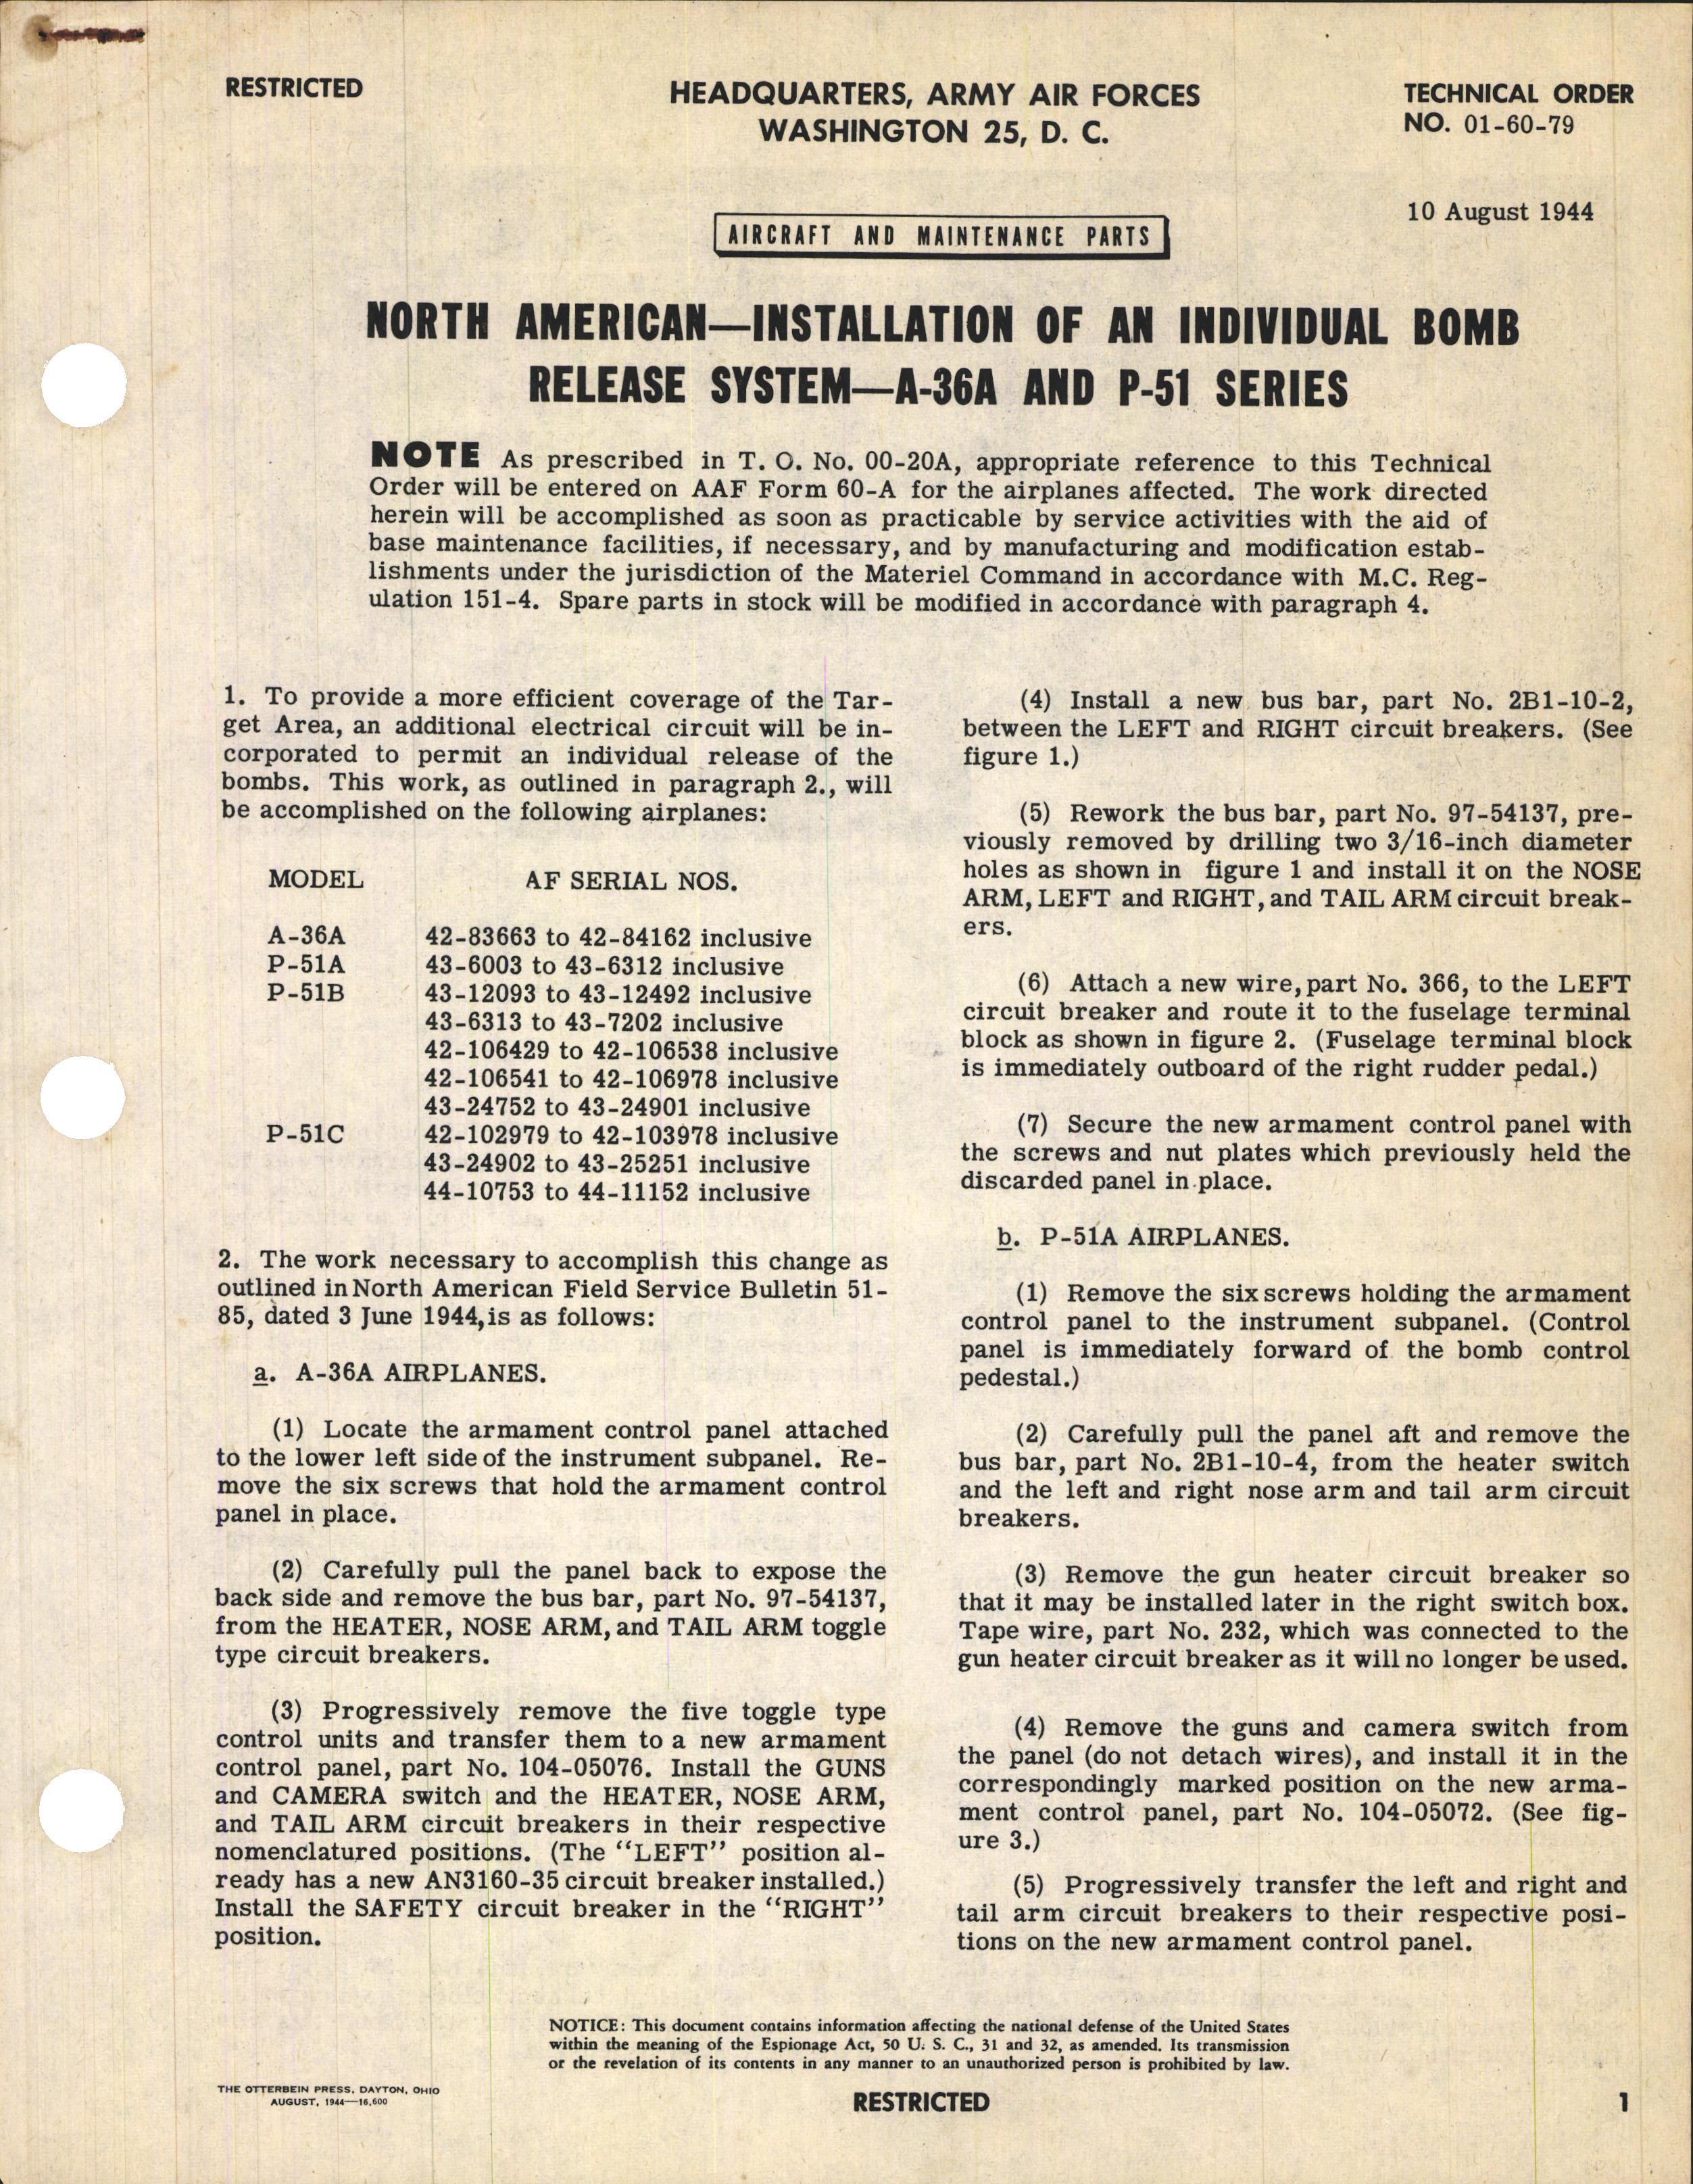 Sample page 1 from AirCorps Library document: Installation of an Individual Bomb Release System for A-36A and P-51 Series